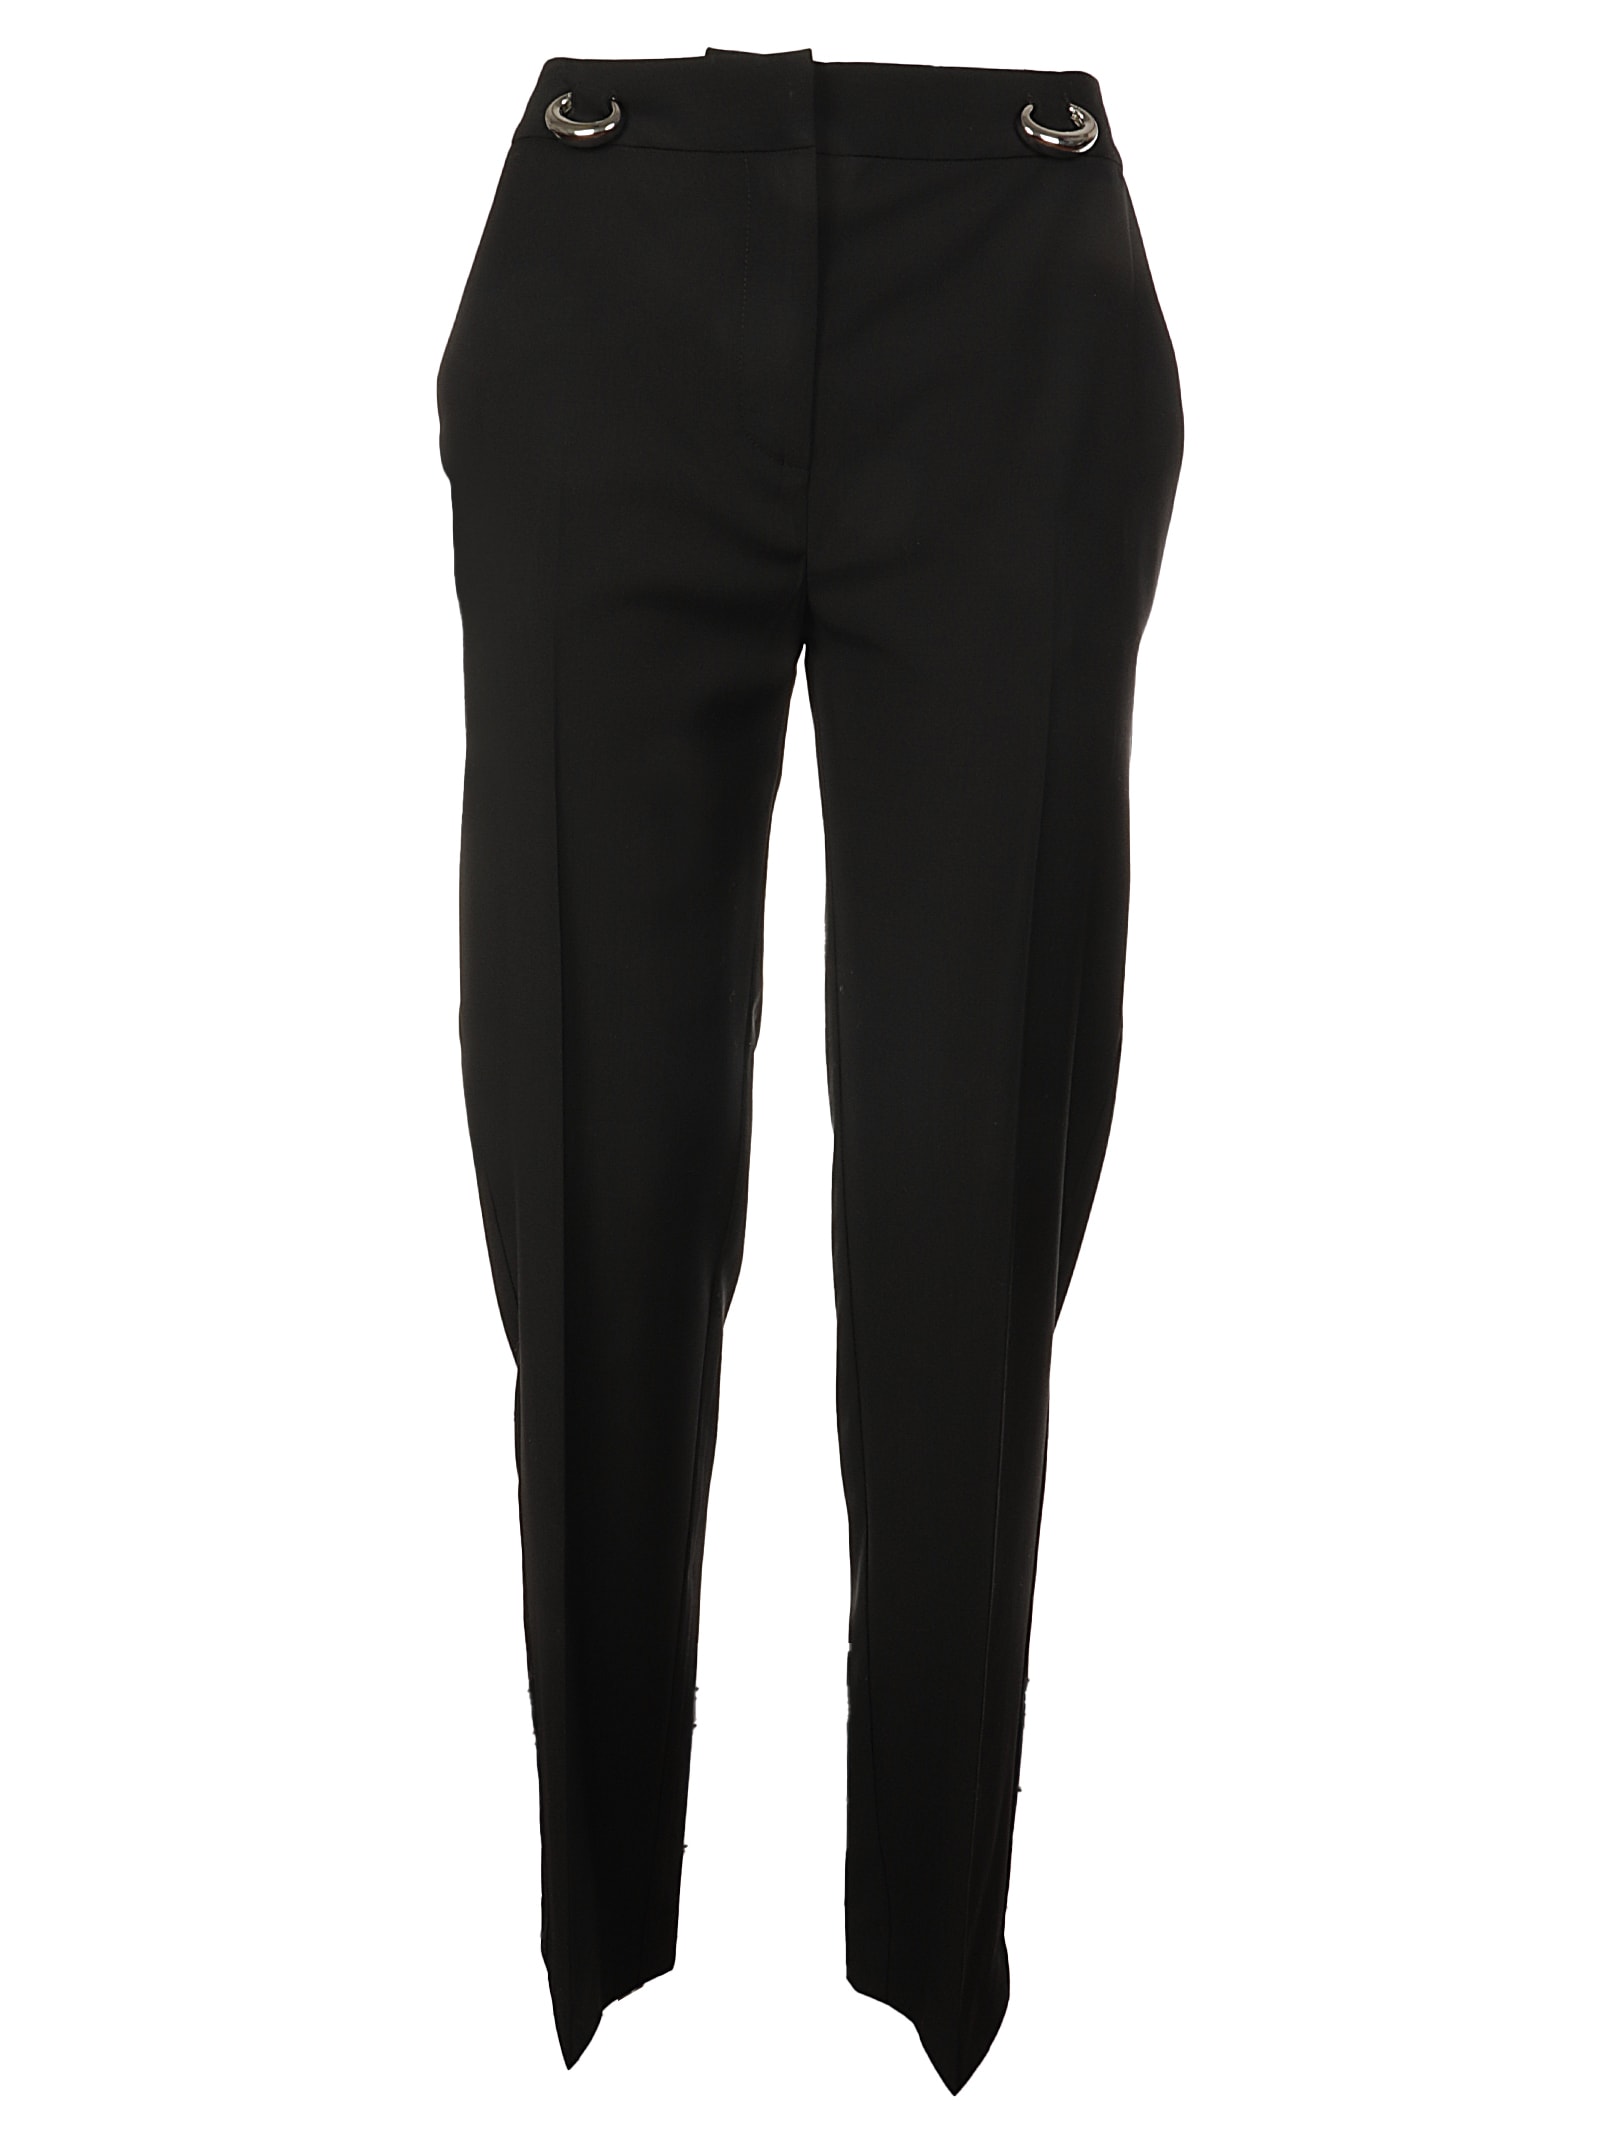 ACT N1 METAL CIGARETTE trousers,PSP2103 03